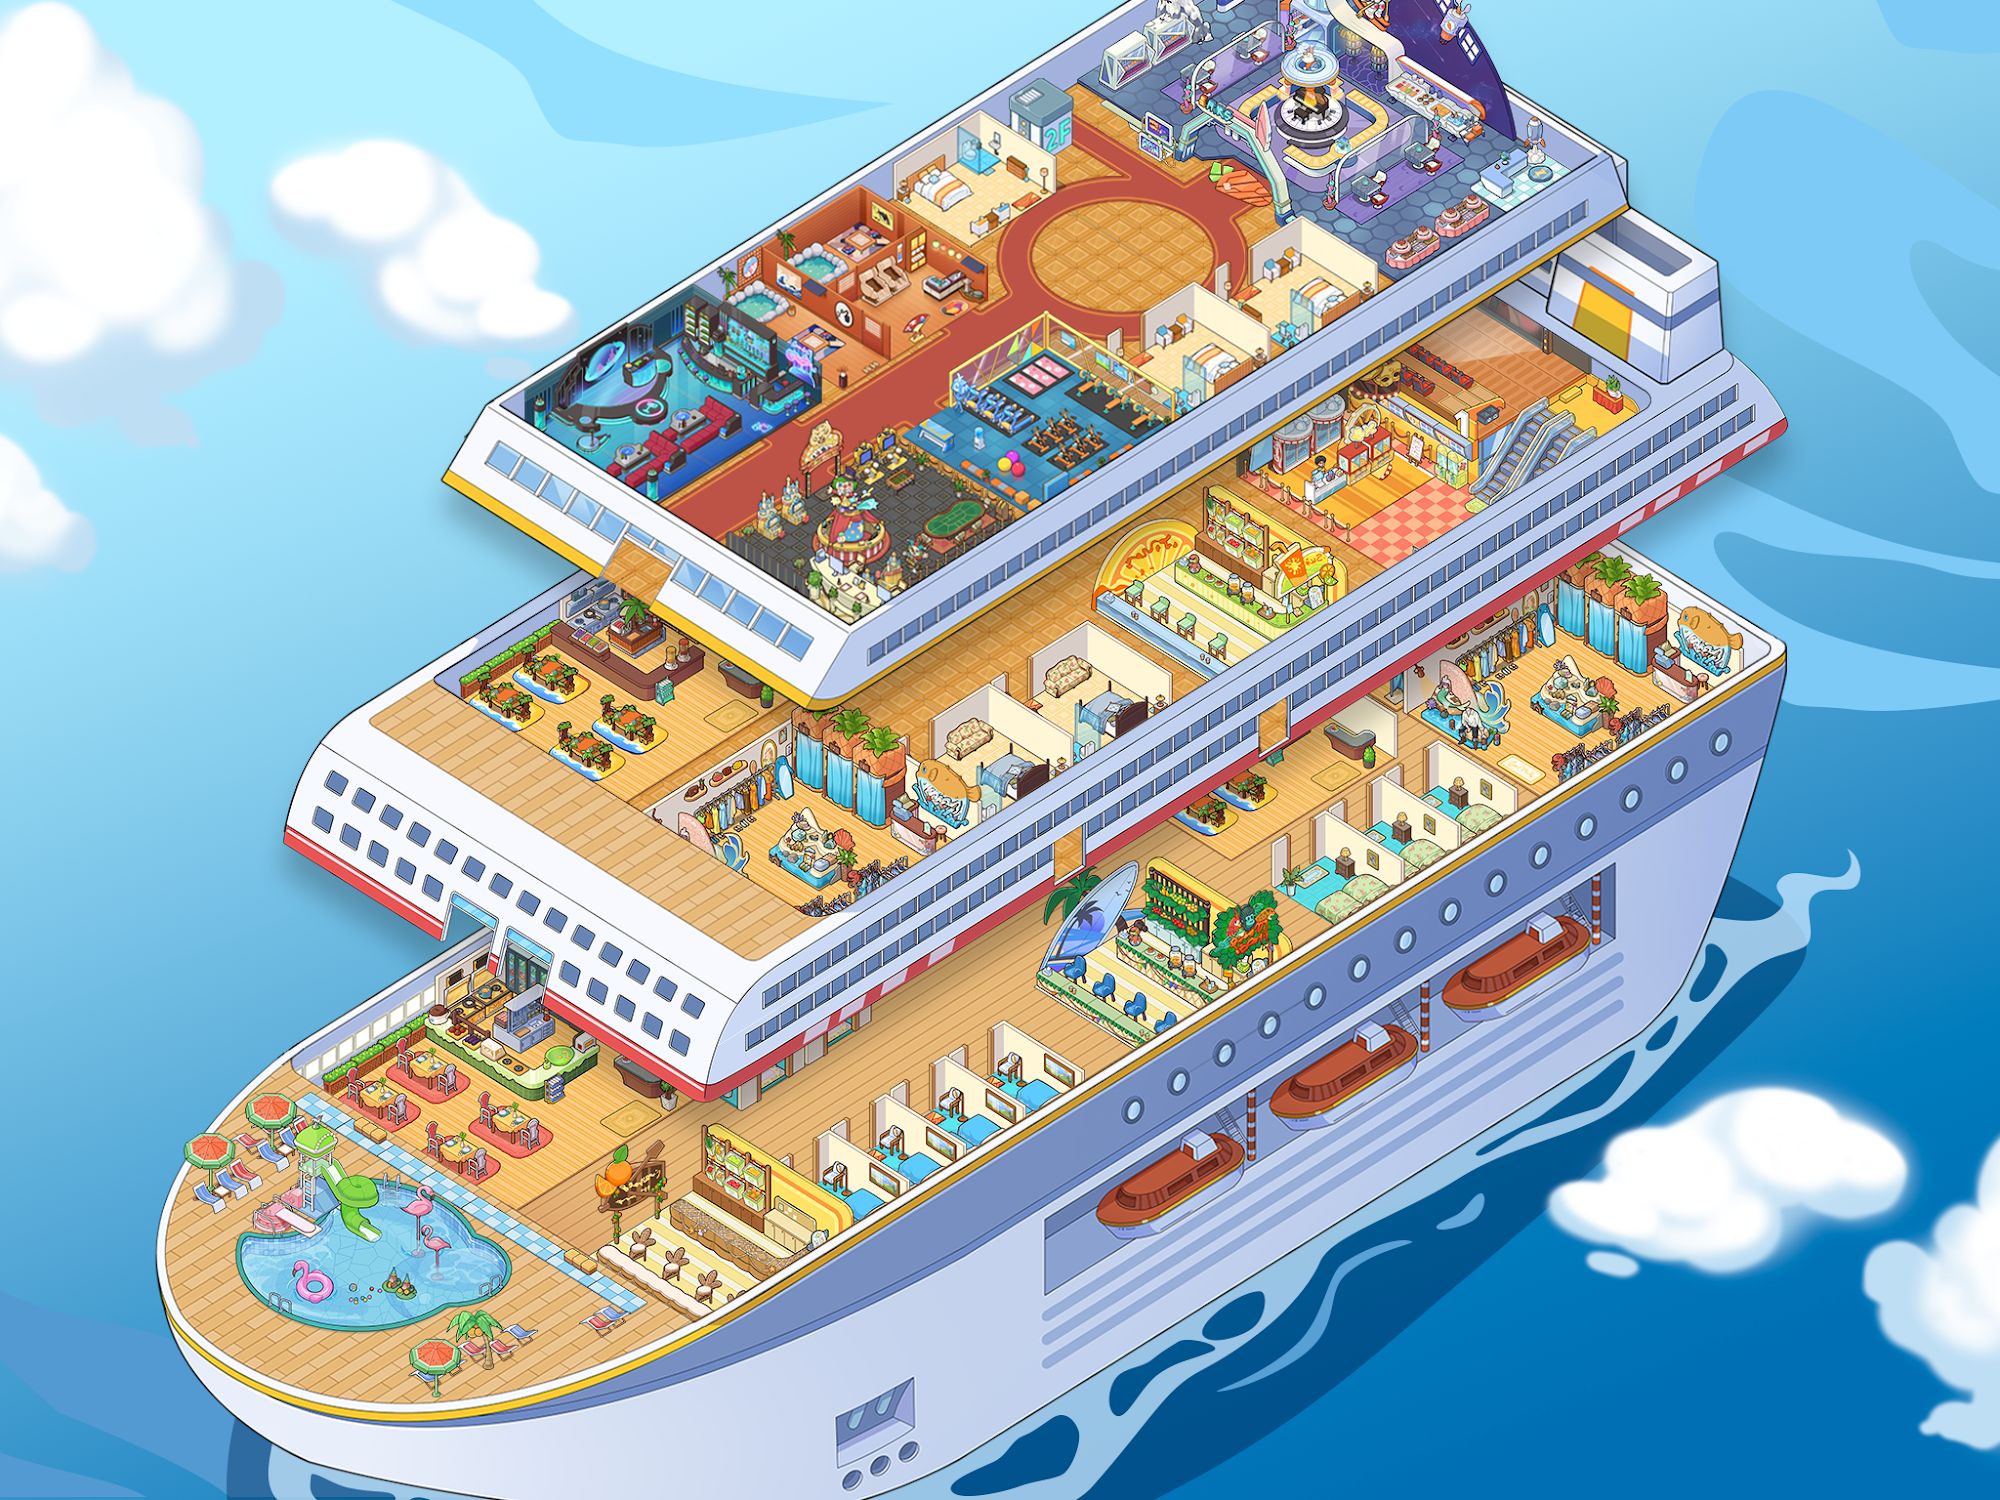 My Cruise - Android game screenshots.